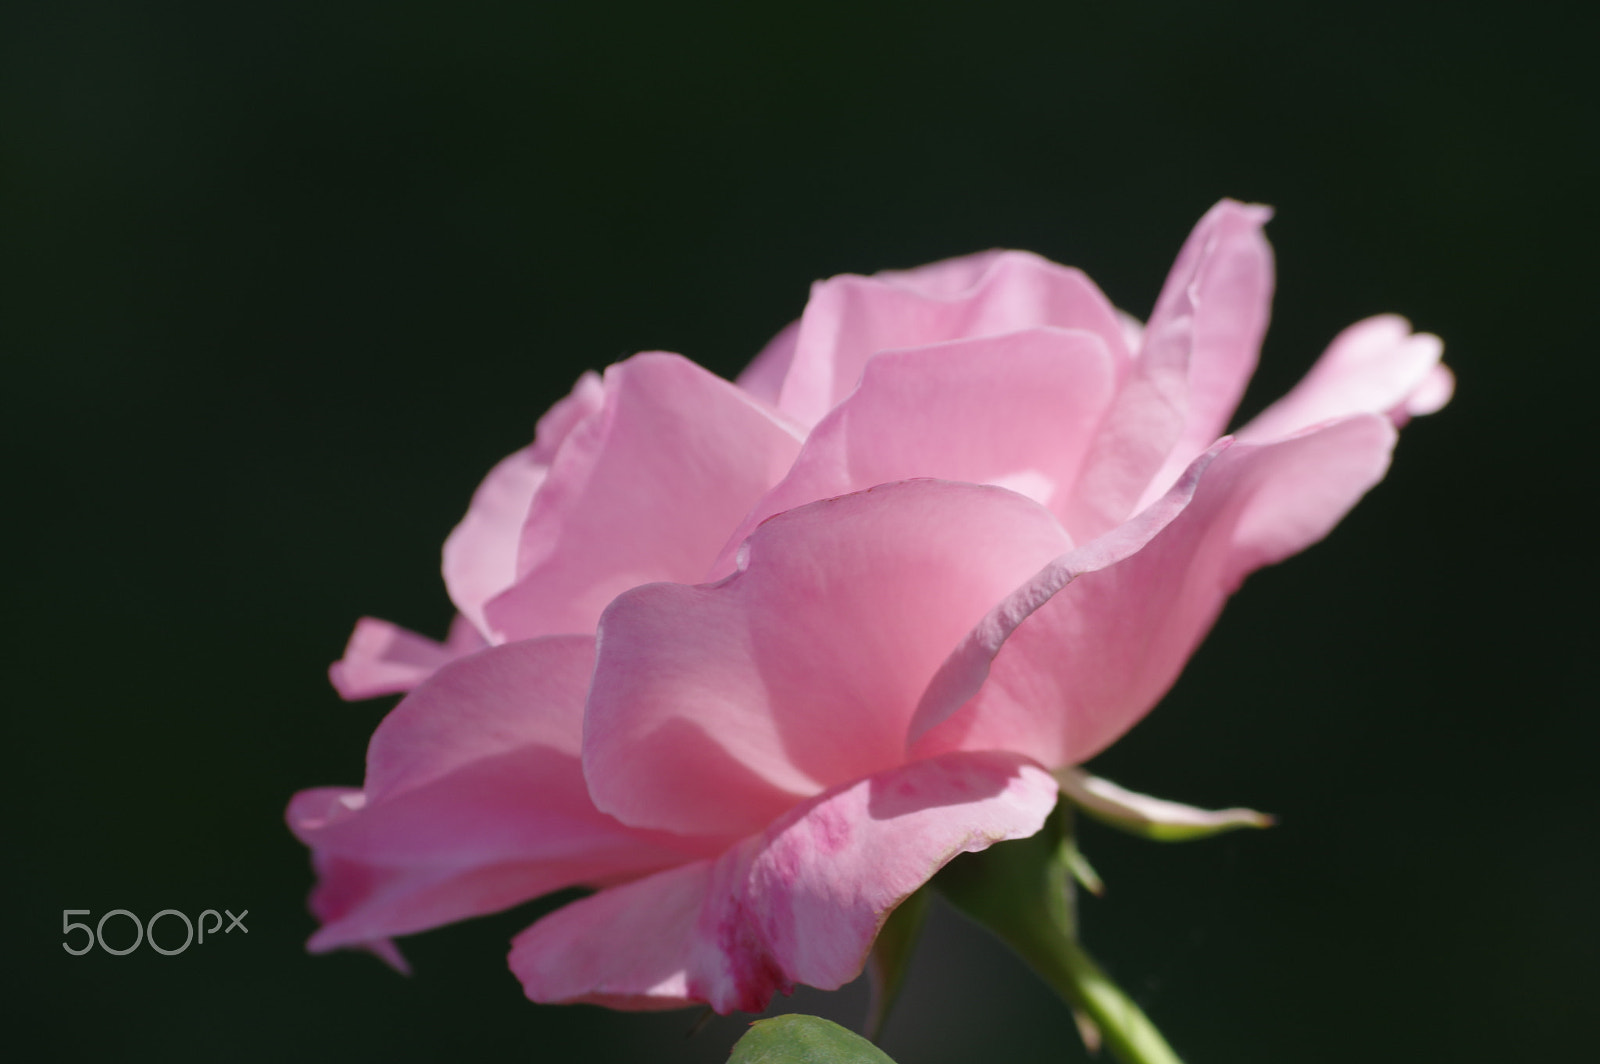 Pentax K-3 II sample photo. A rose for women photography